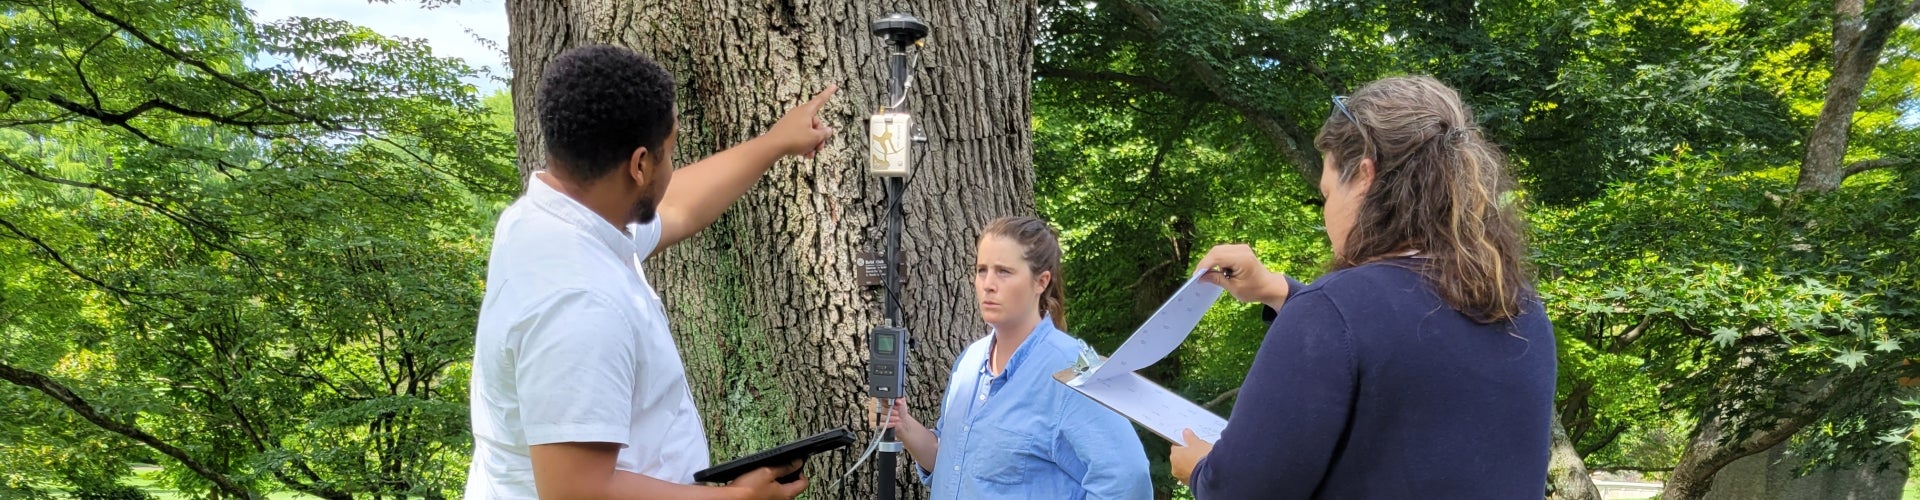 Three people stand in front of a tree with devices in their hands.